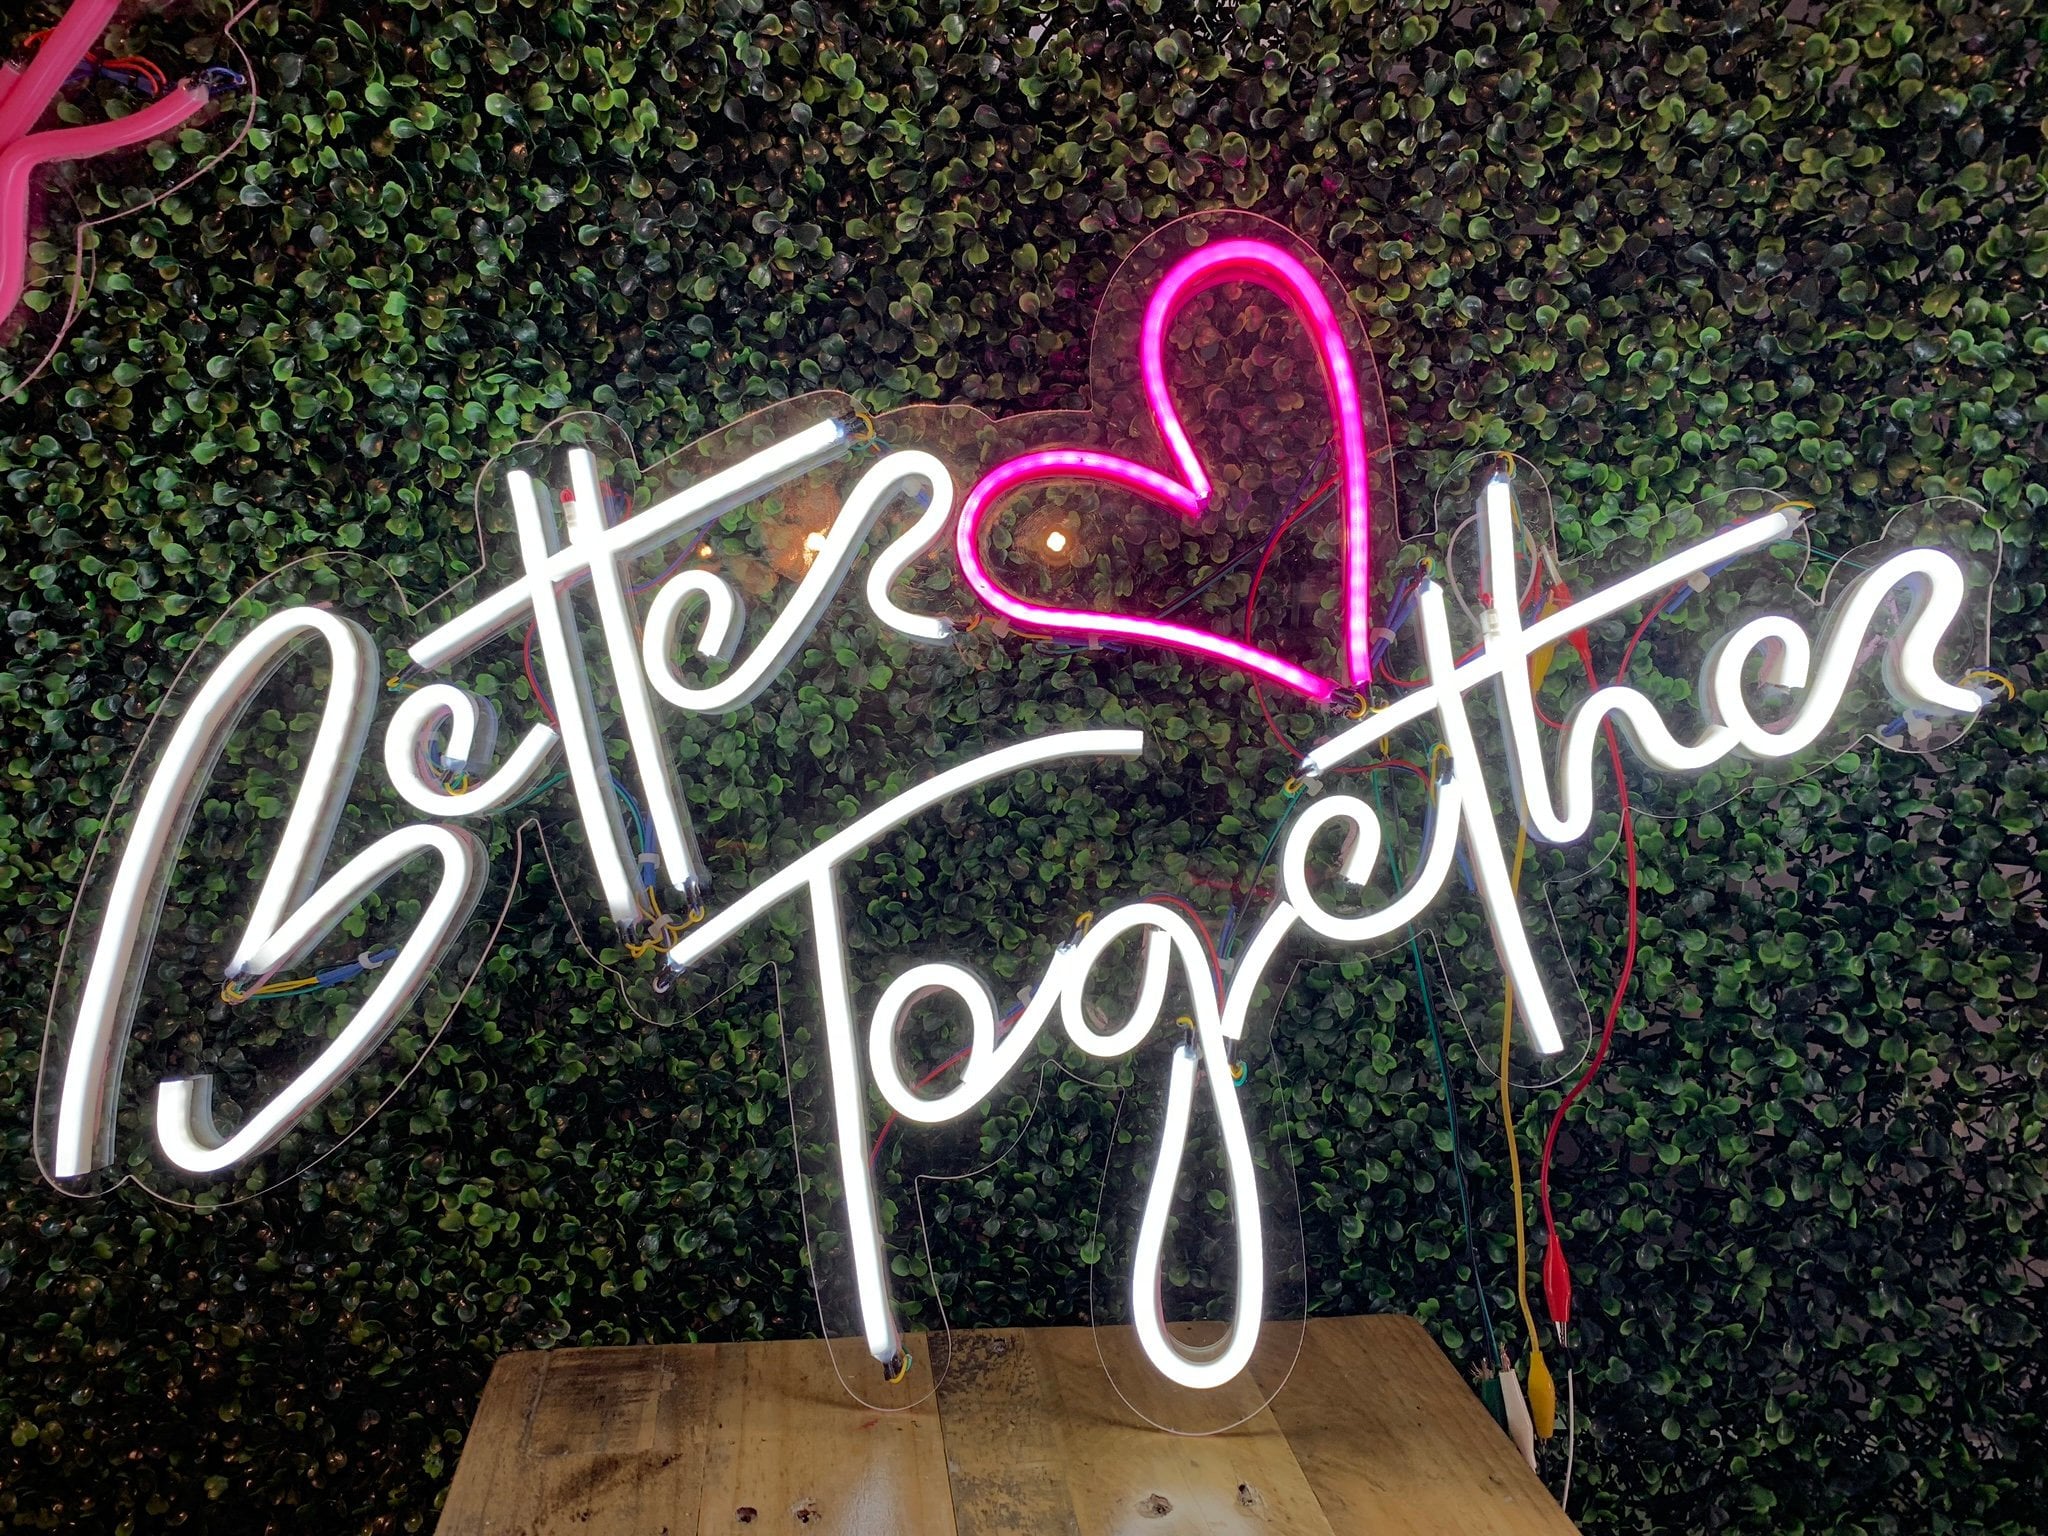 Better Together,LED neon sign,wedding signs